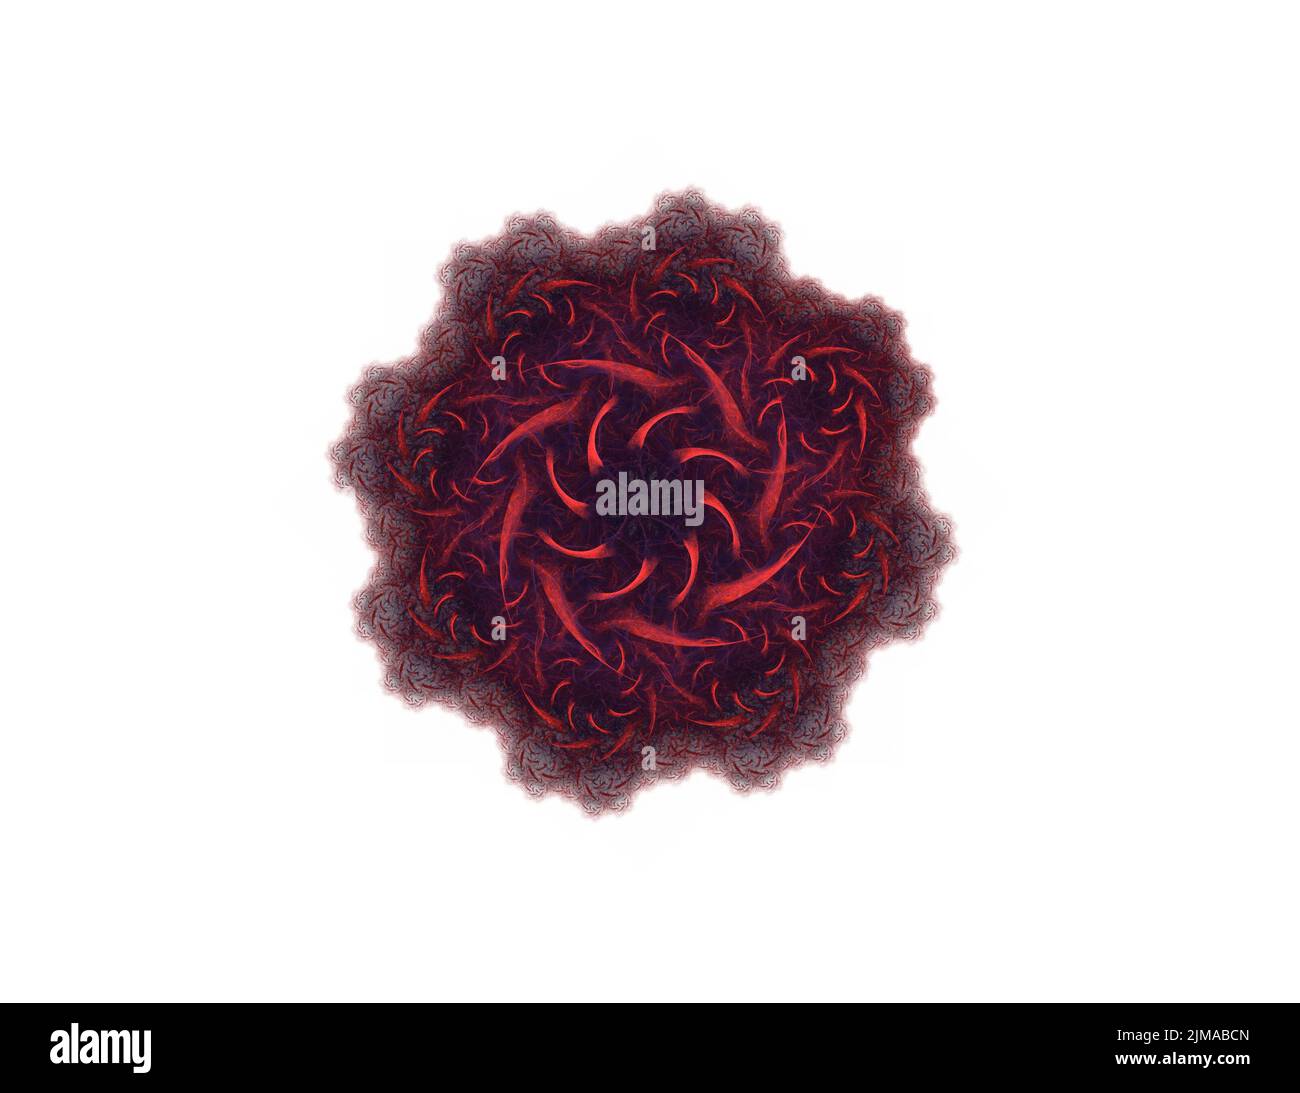 Abstract aggressive fractal red black figure Stock Photo